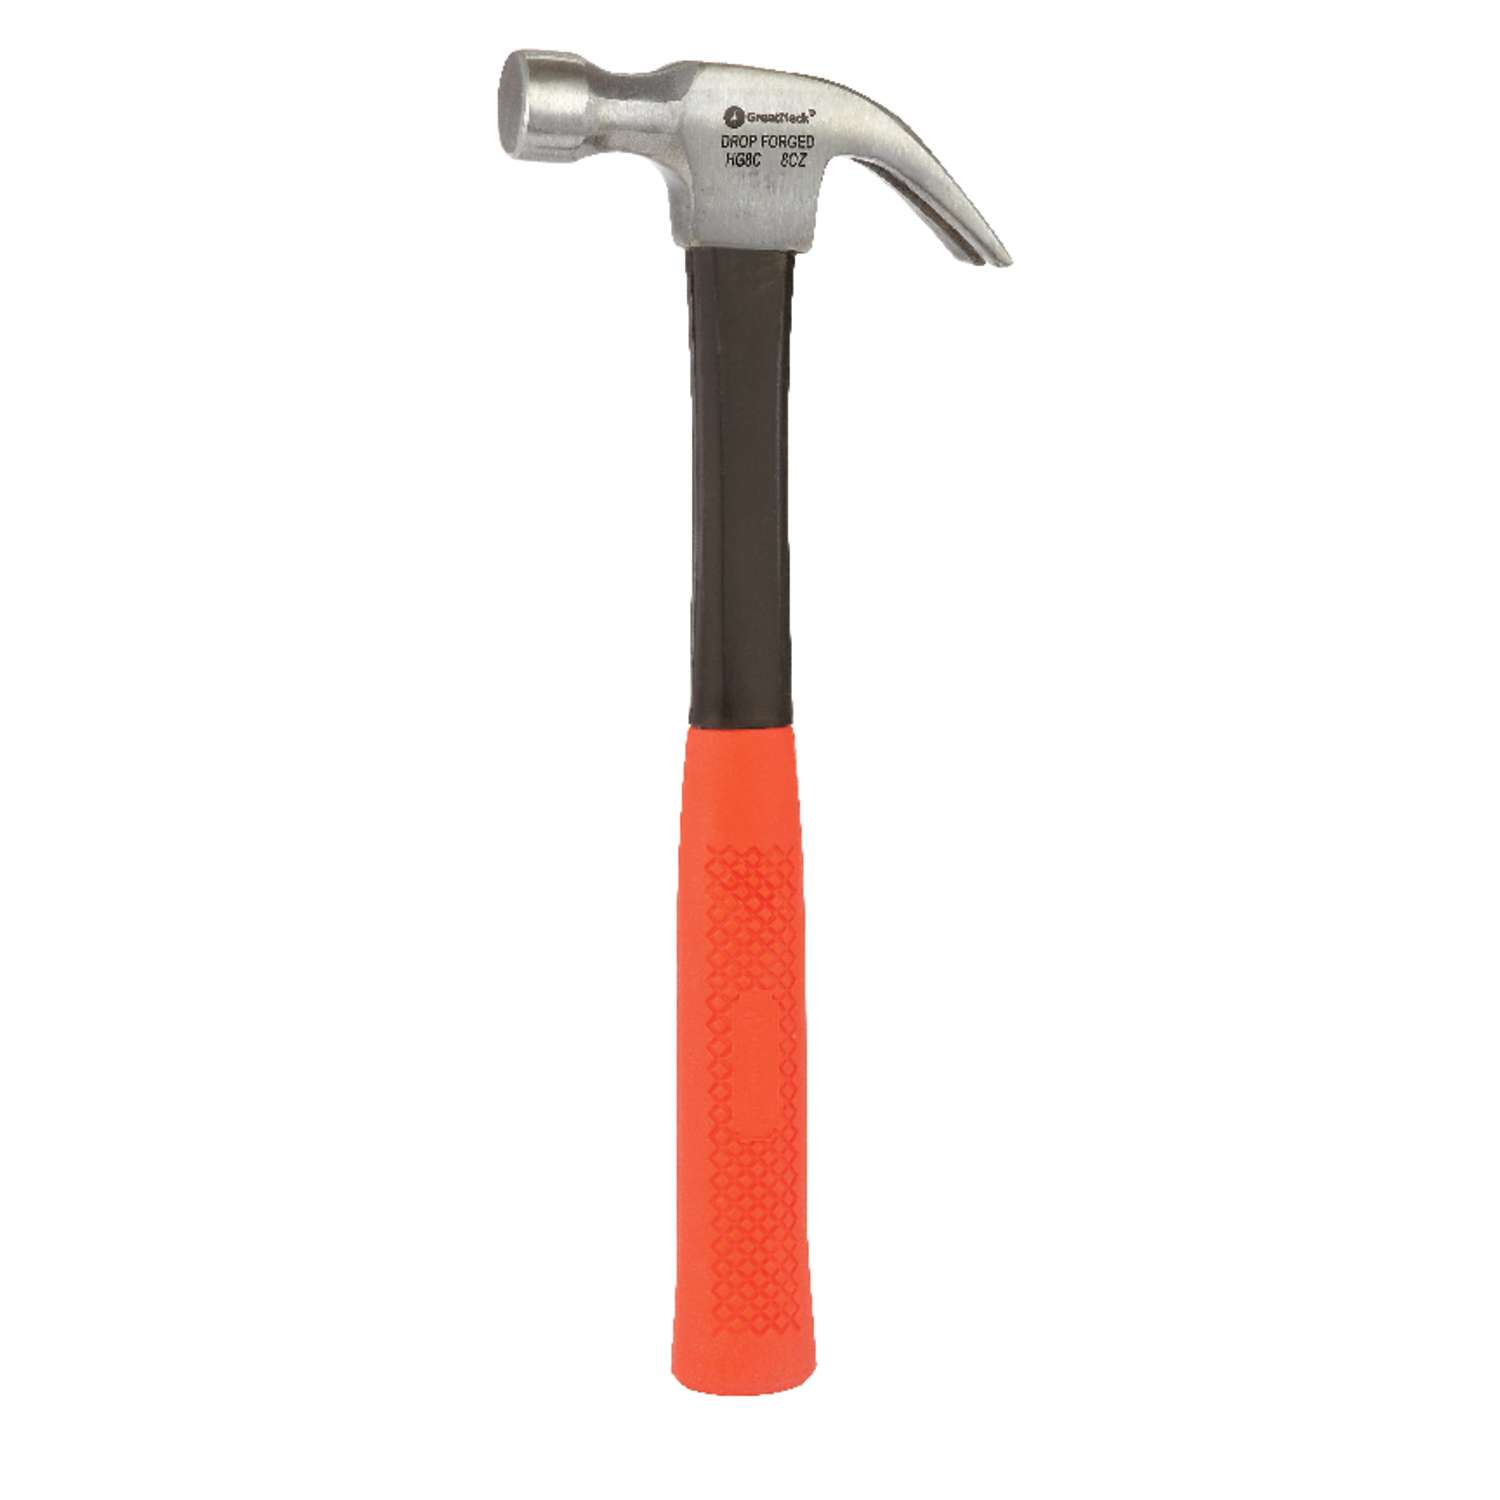 Great Neck 8 oz. Milled Face Curve Claw Hammer Fiberglass